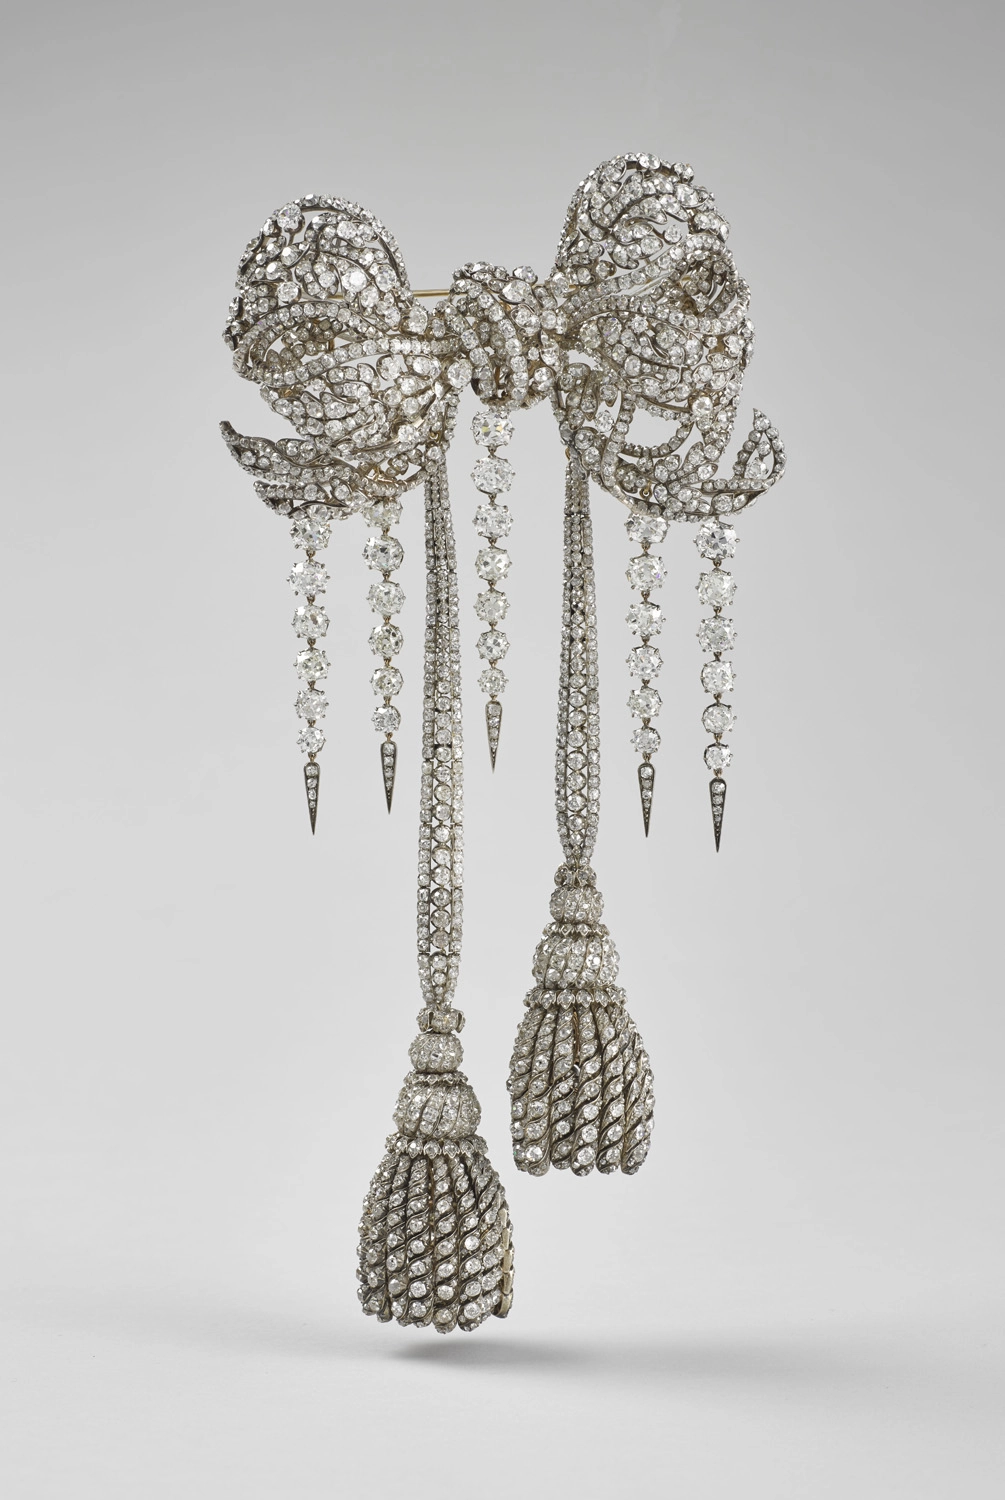 Sparkly Splendour: The Galerie d'Apollon and the French Crown